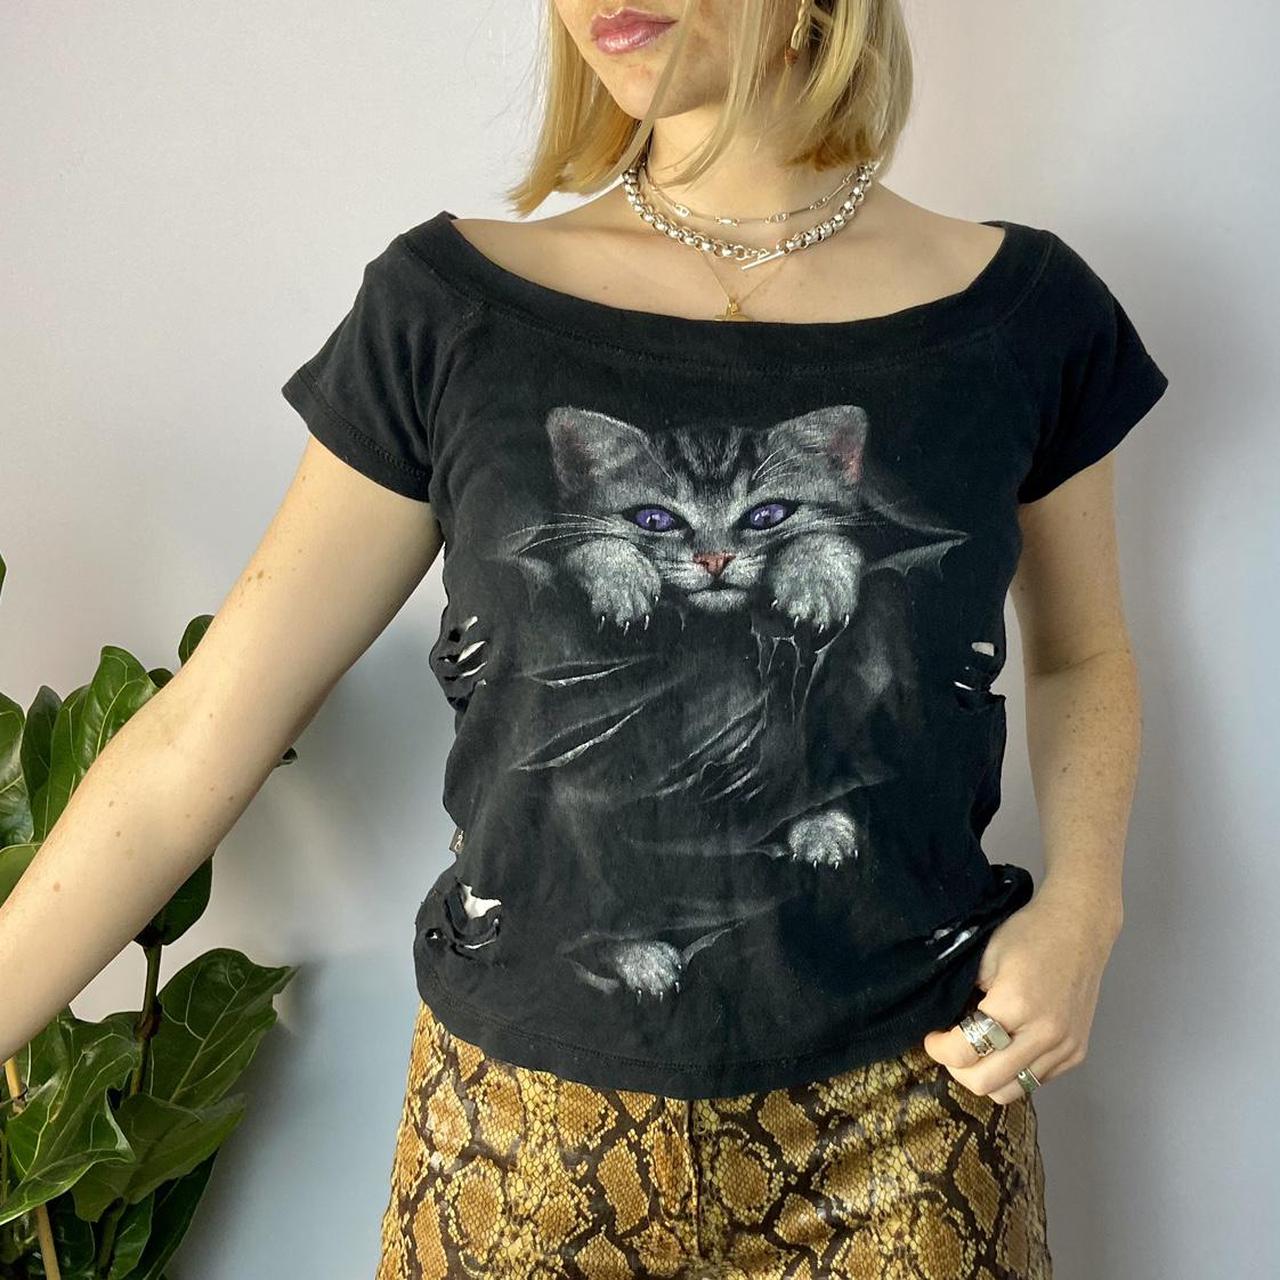 Product Image 1 - goth kitty top !!
Slashed effect